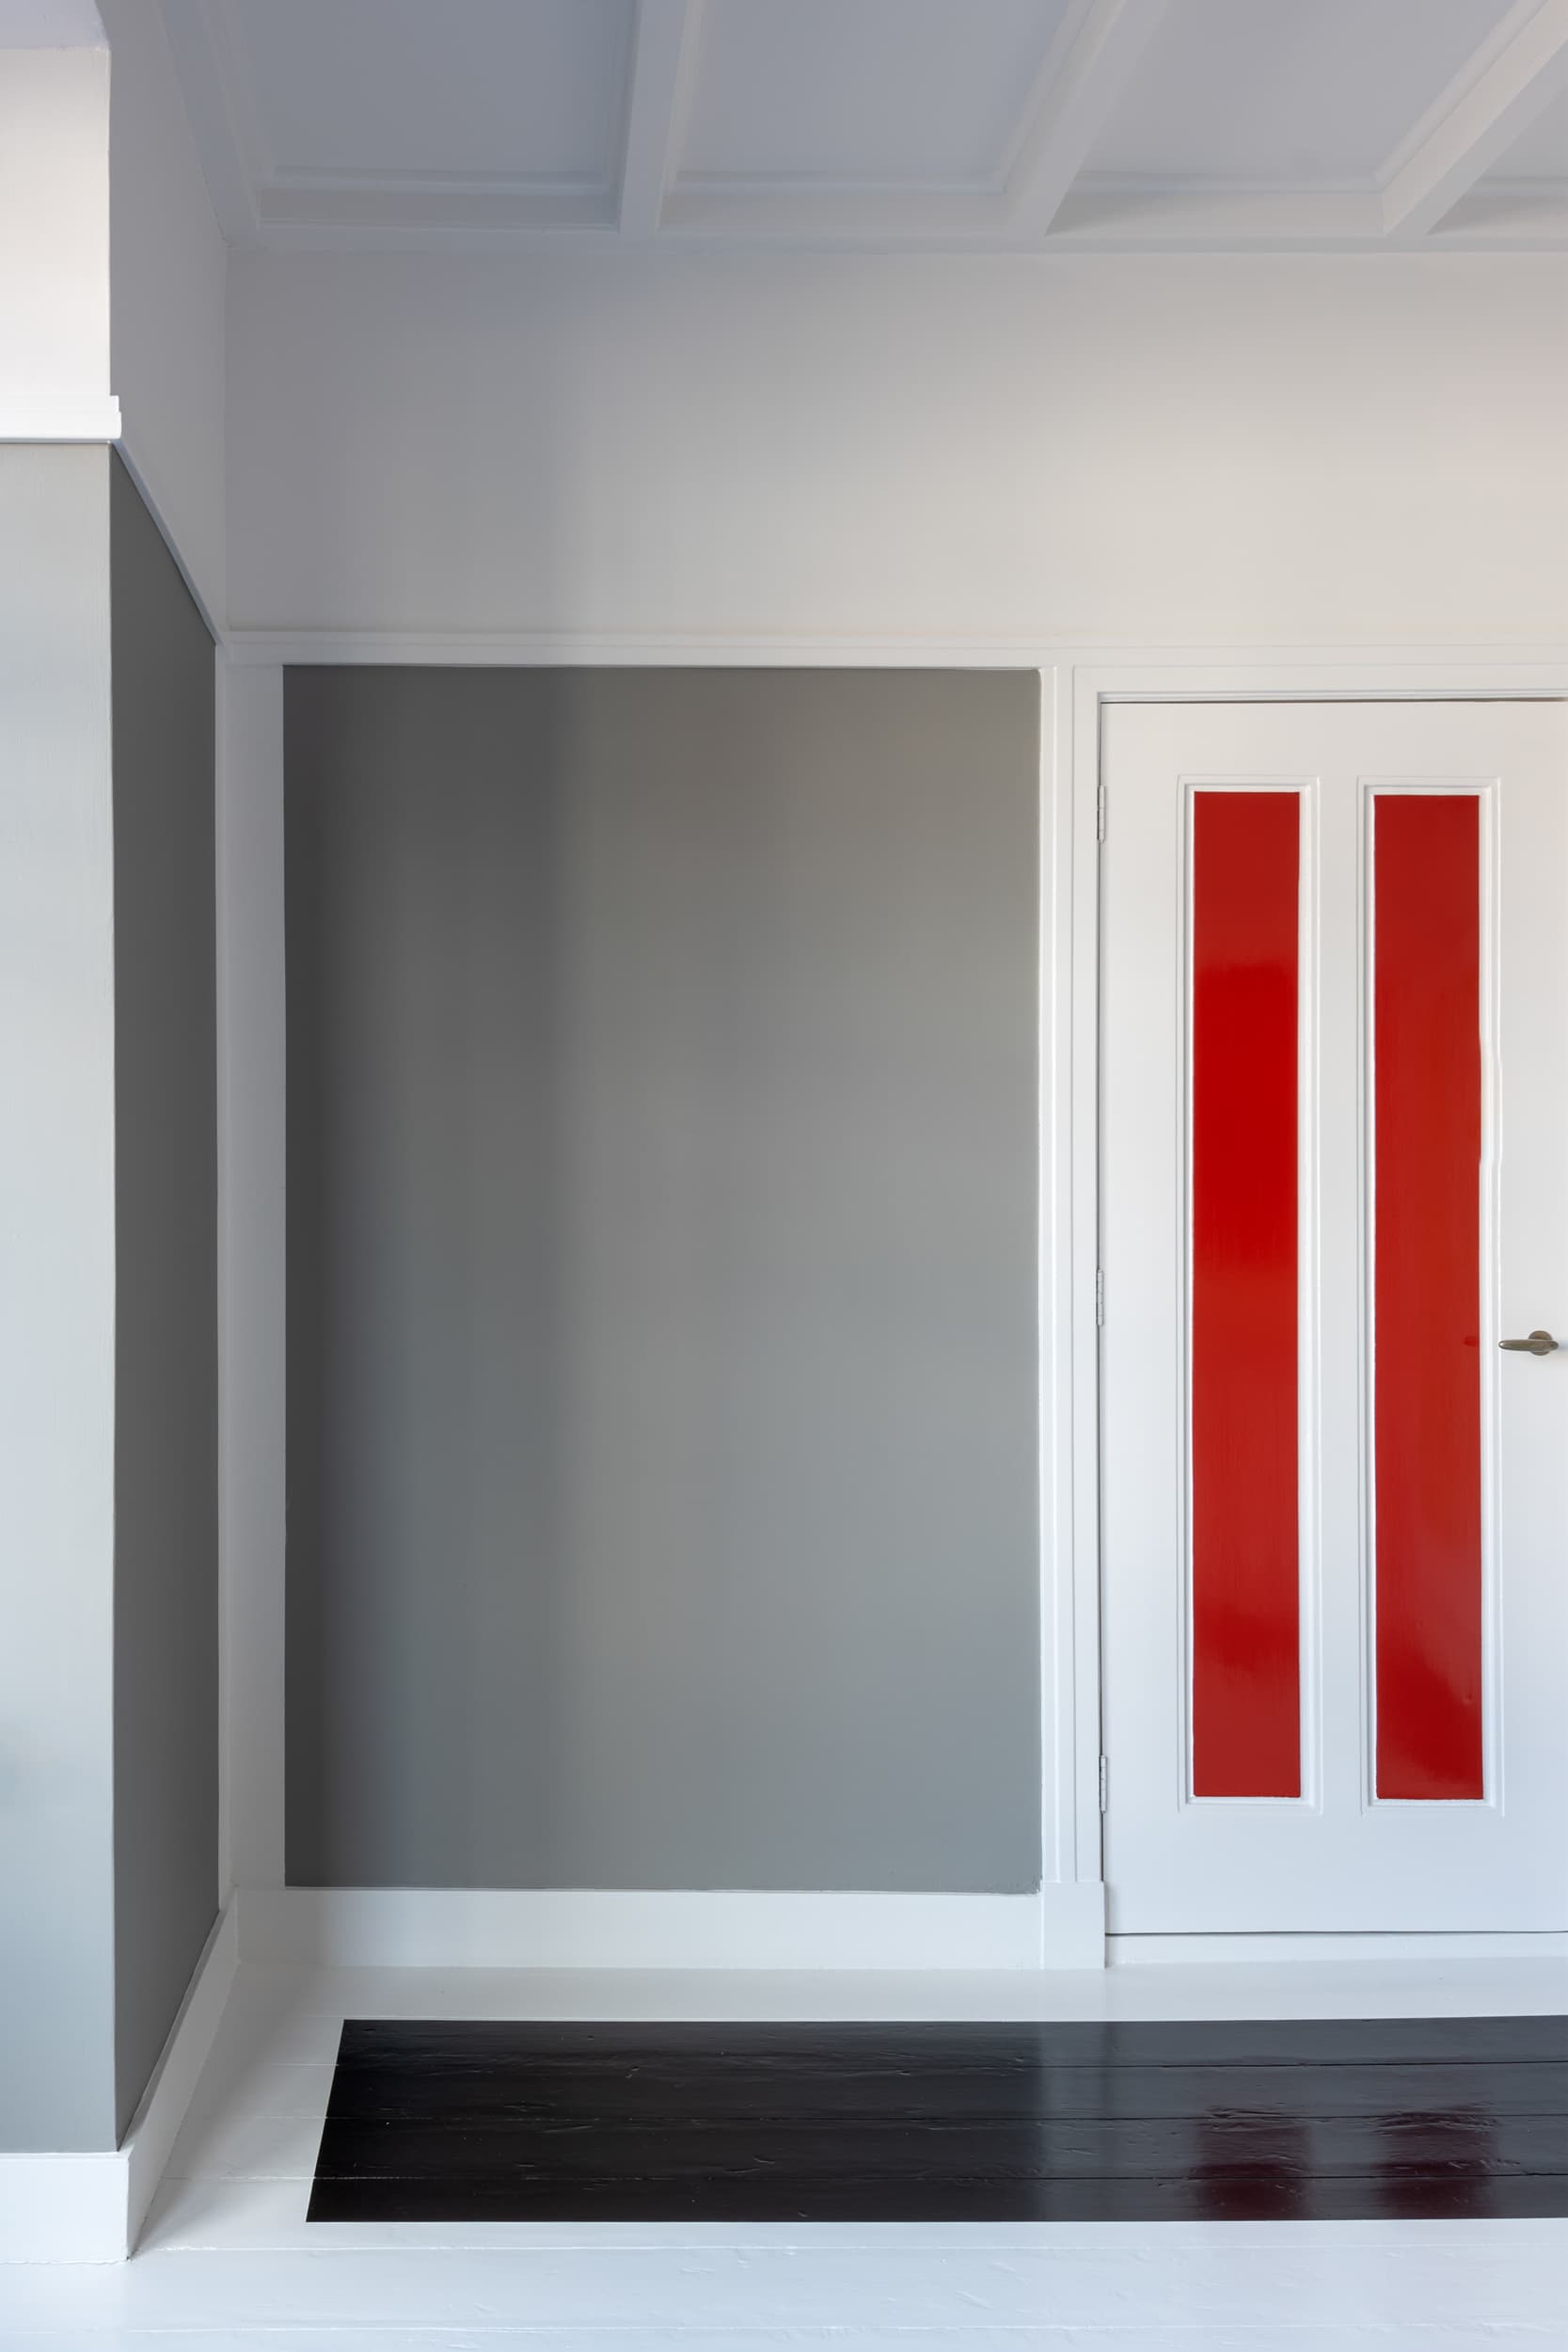 The artwork 'Van Doesburg-Rinsemahuis #1' by Jildo Tim Hof showing A grey wall in a corner with a red striped door